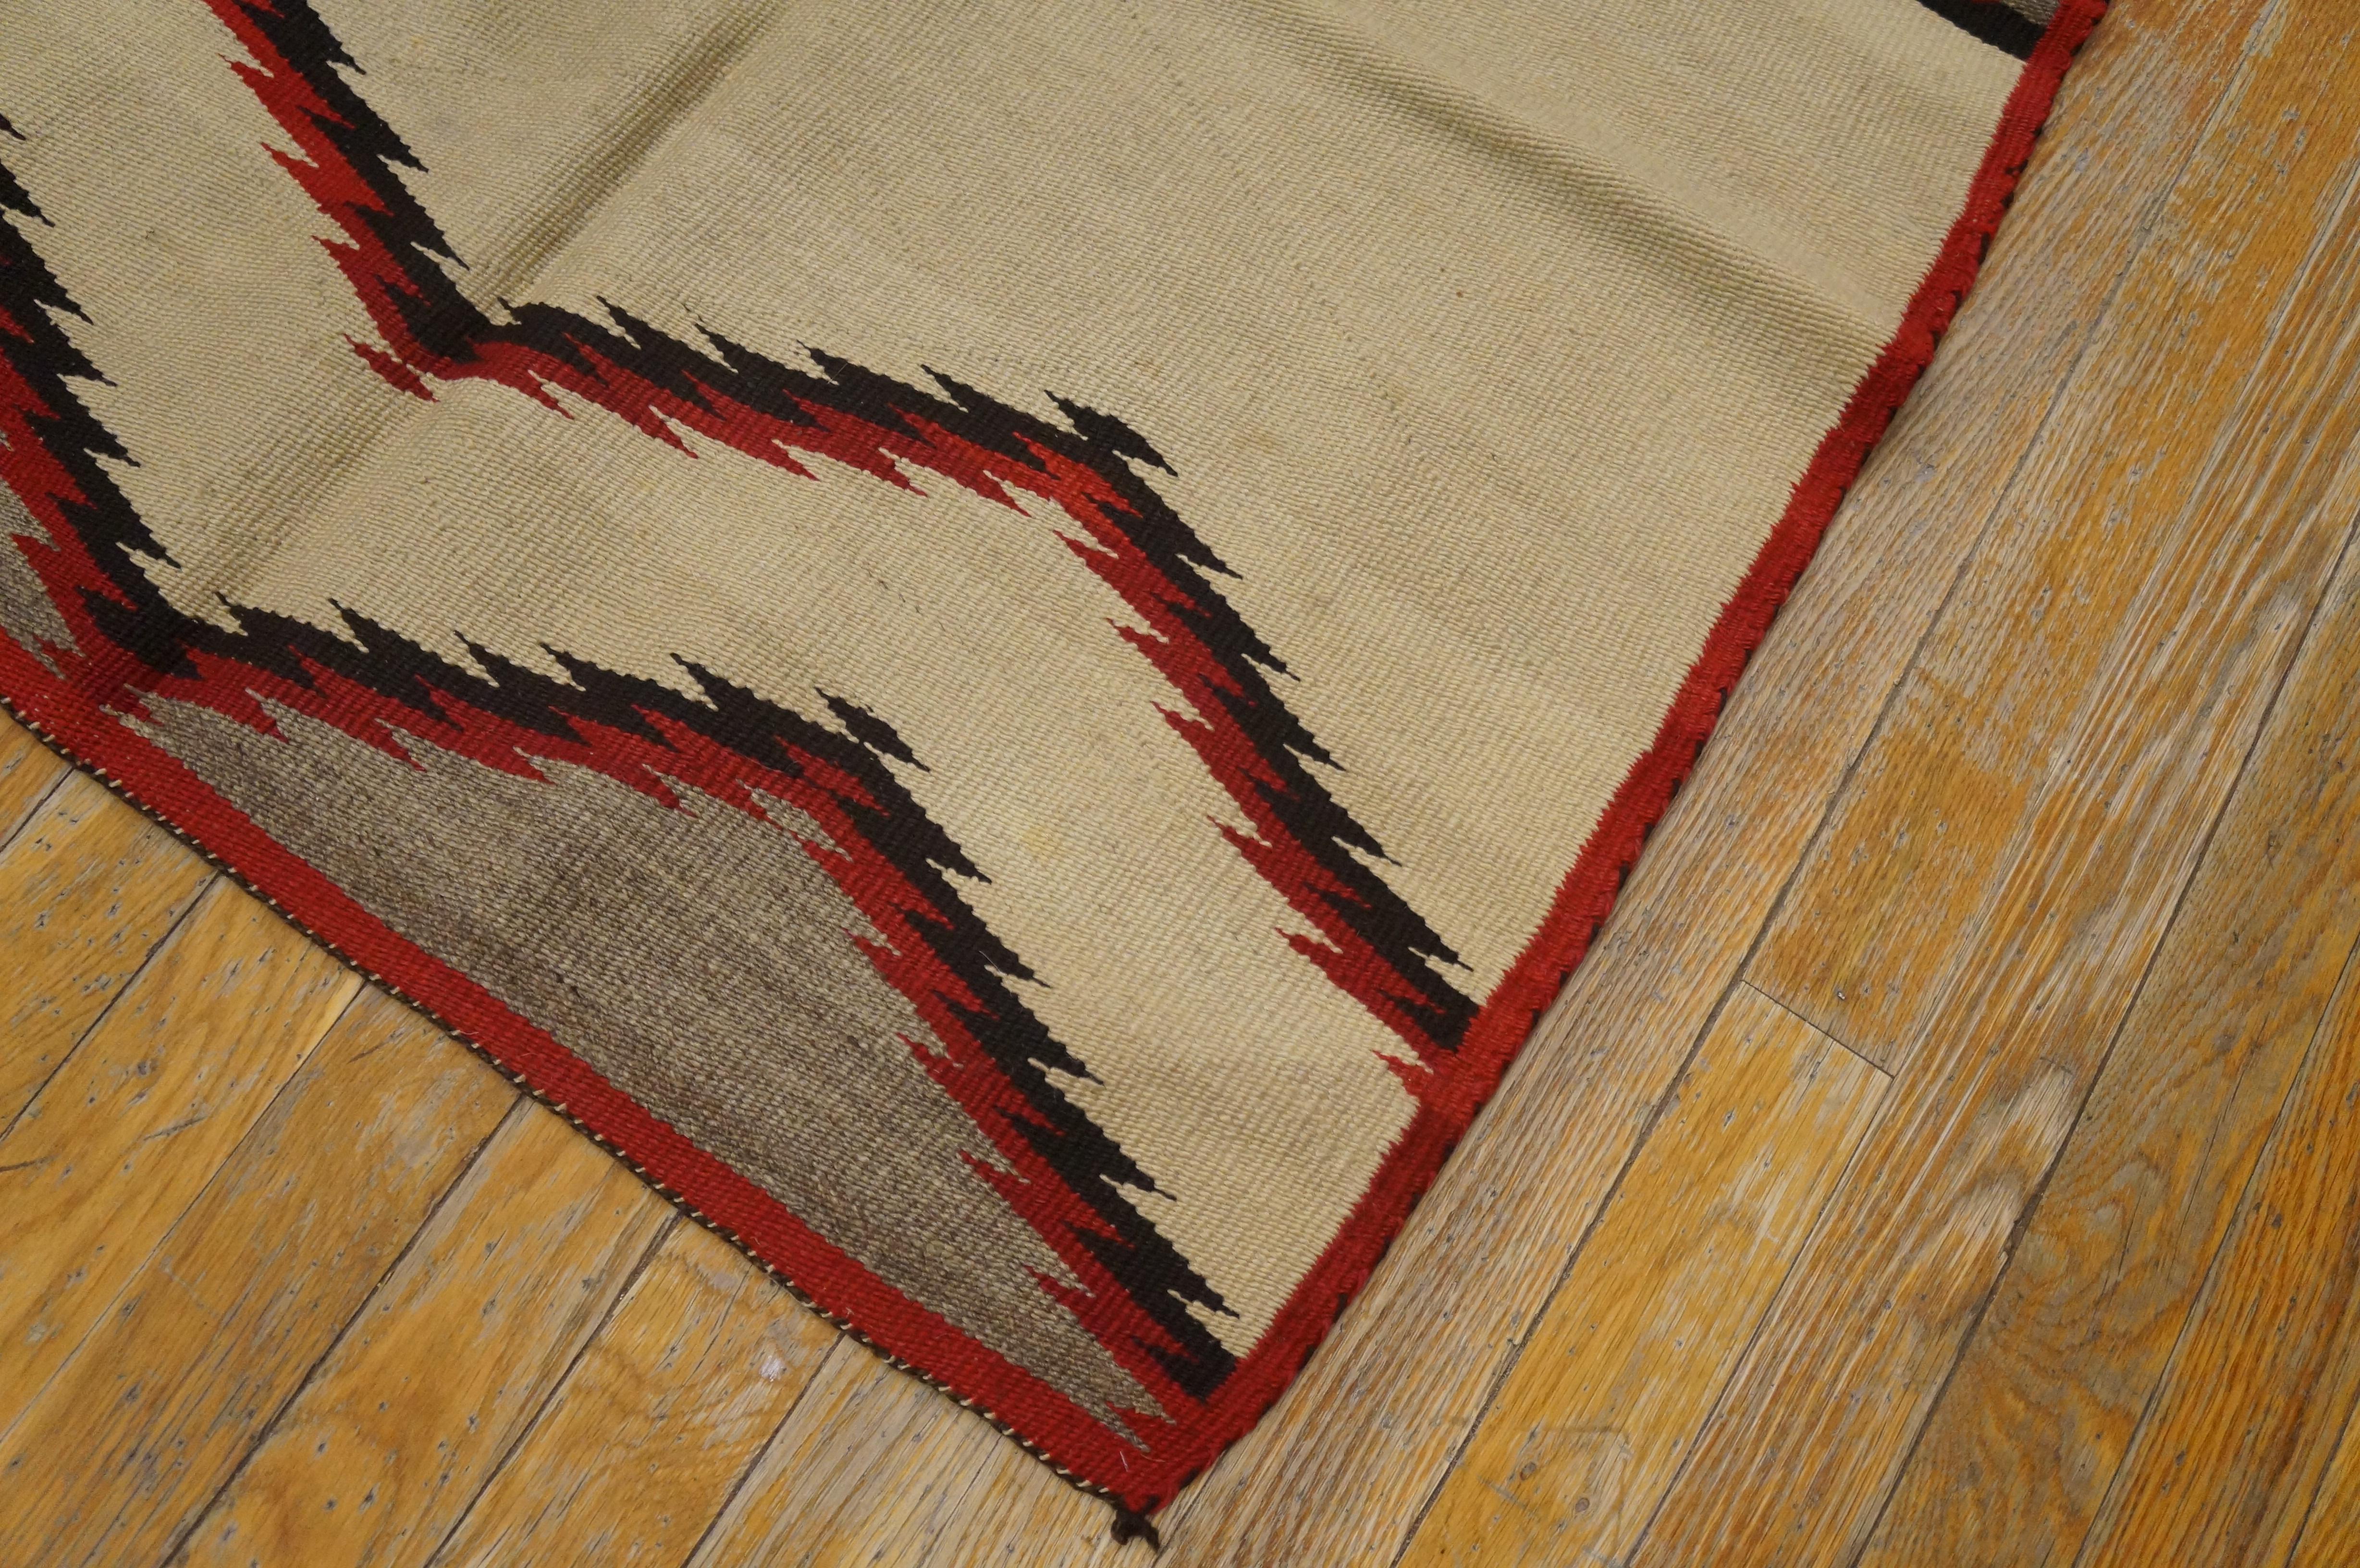 Hand-Woven Early 20th Century American Navajo Saddle Carpet ( 2'8